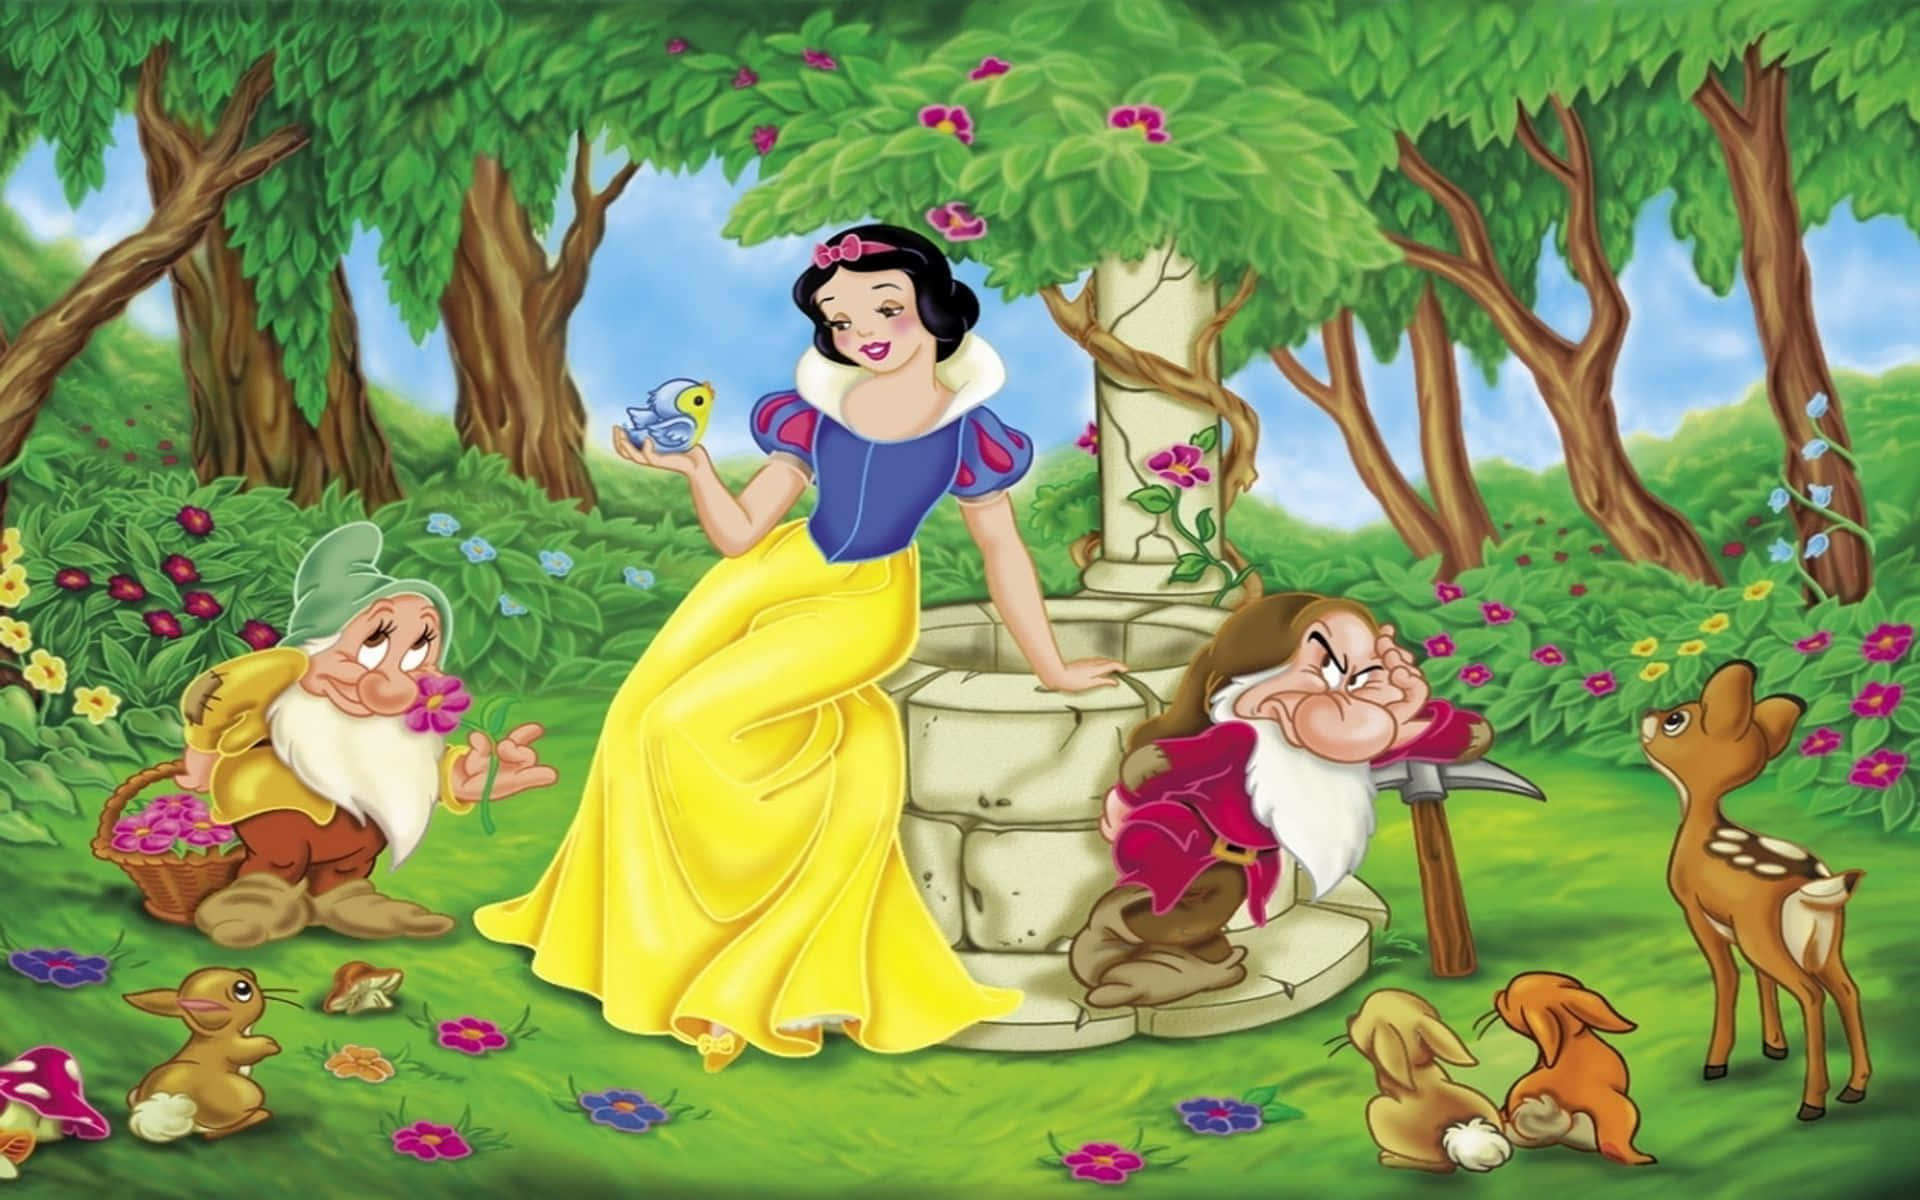 Snow White in a romantic setting